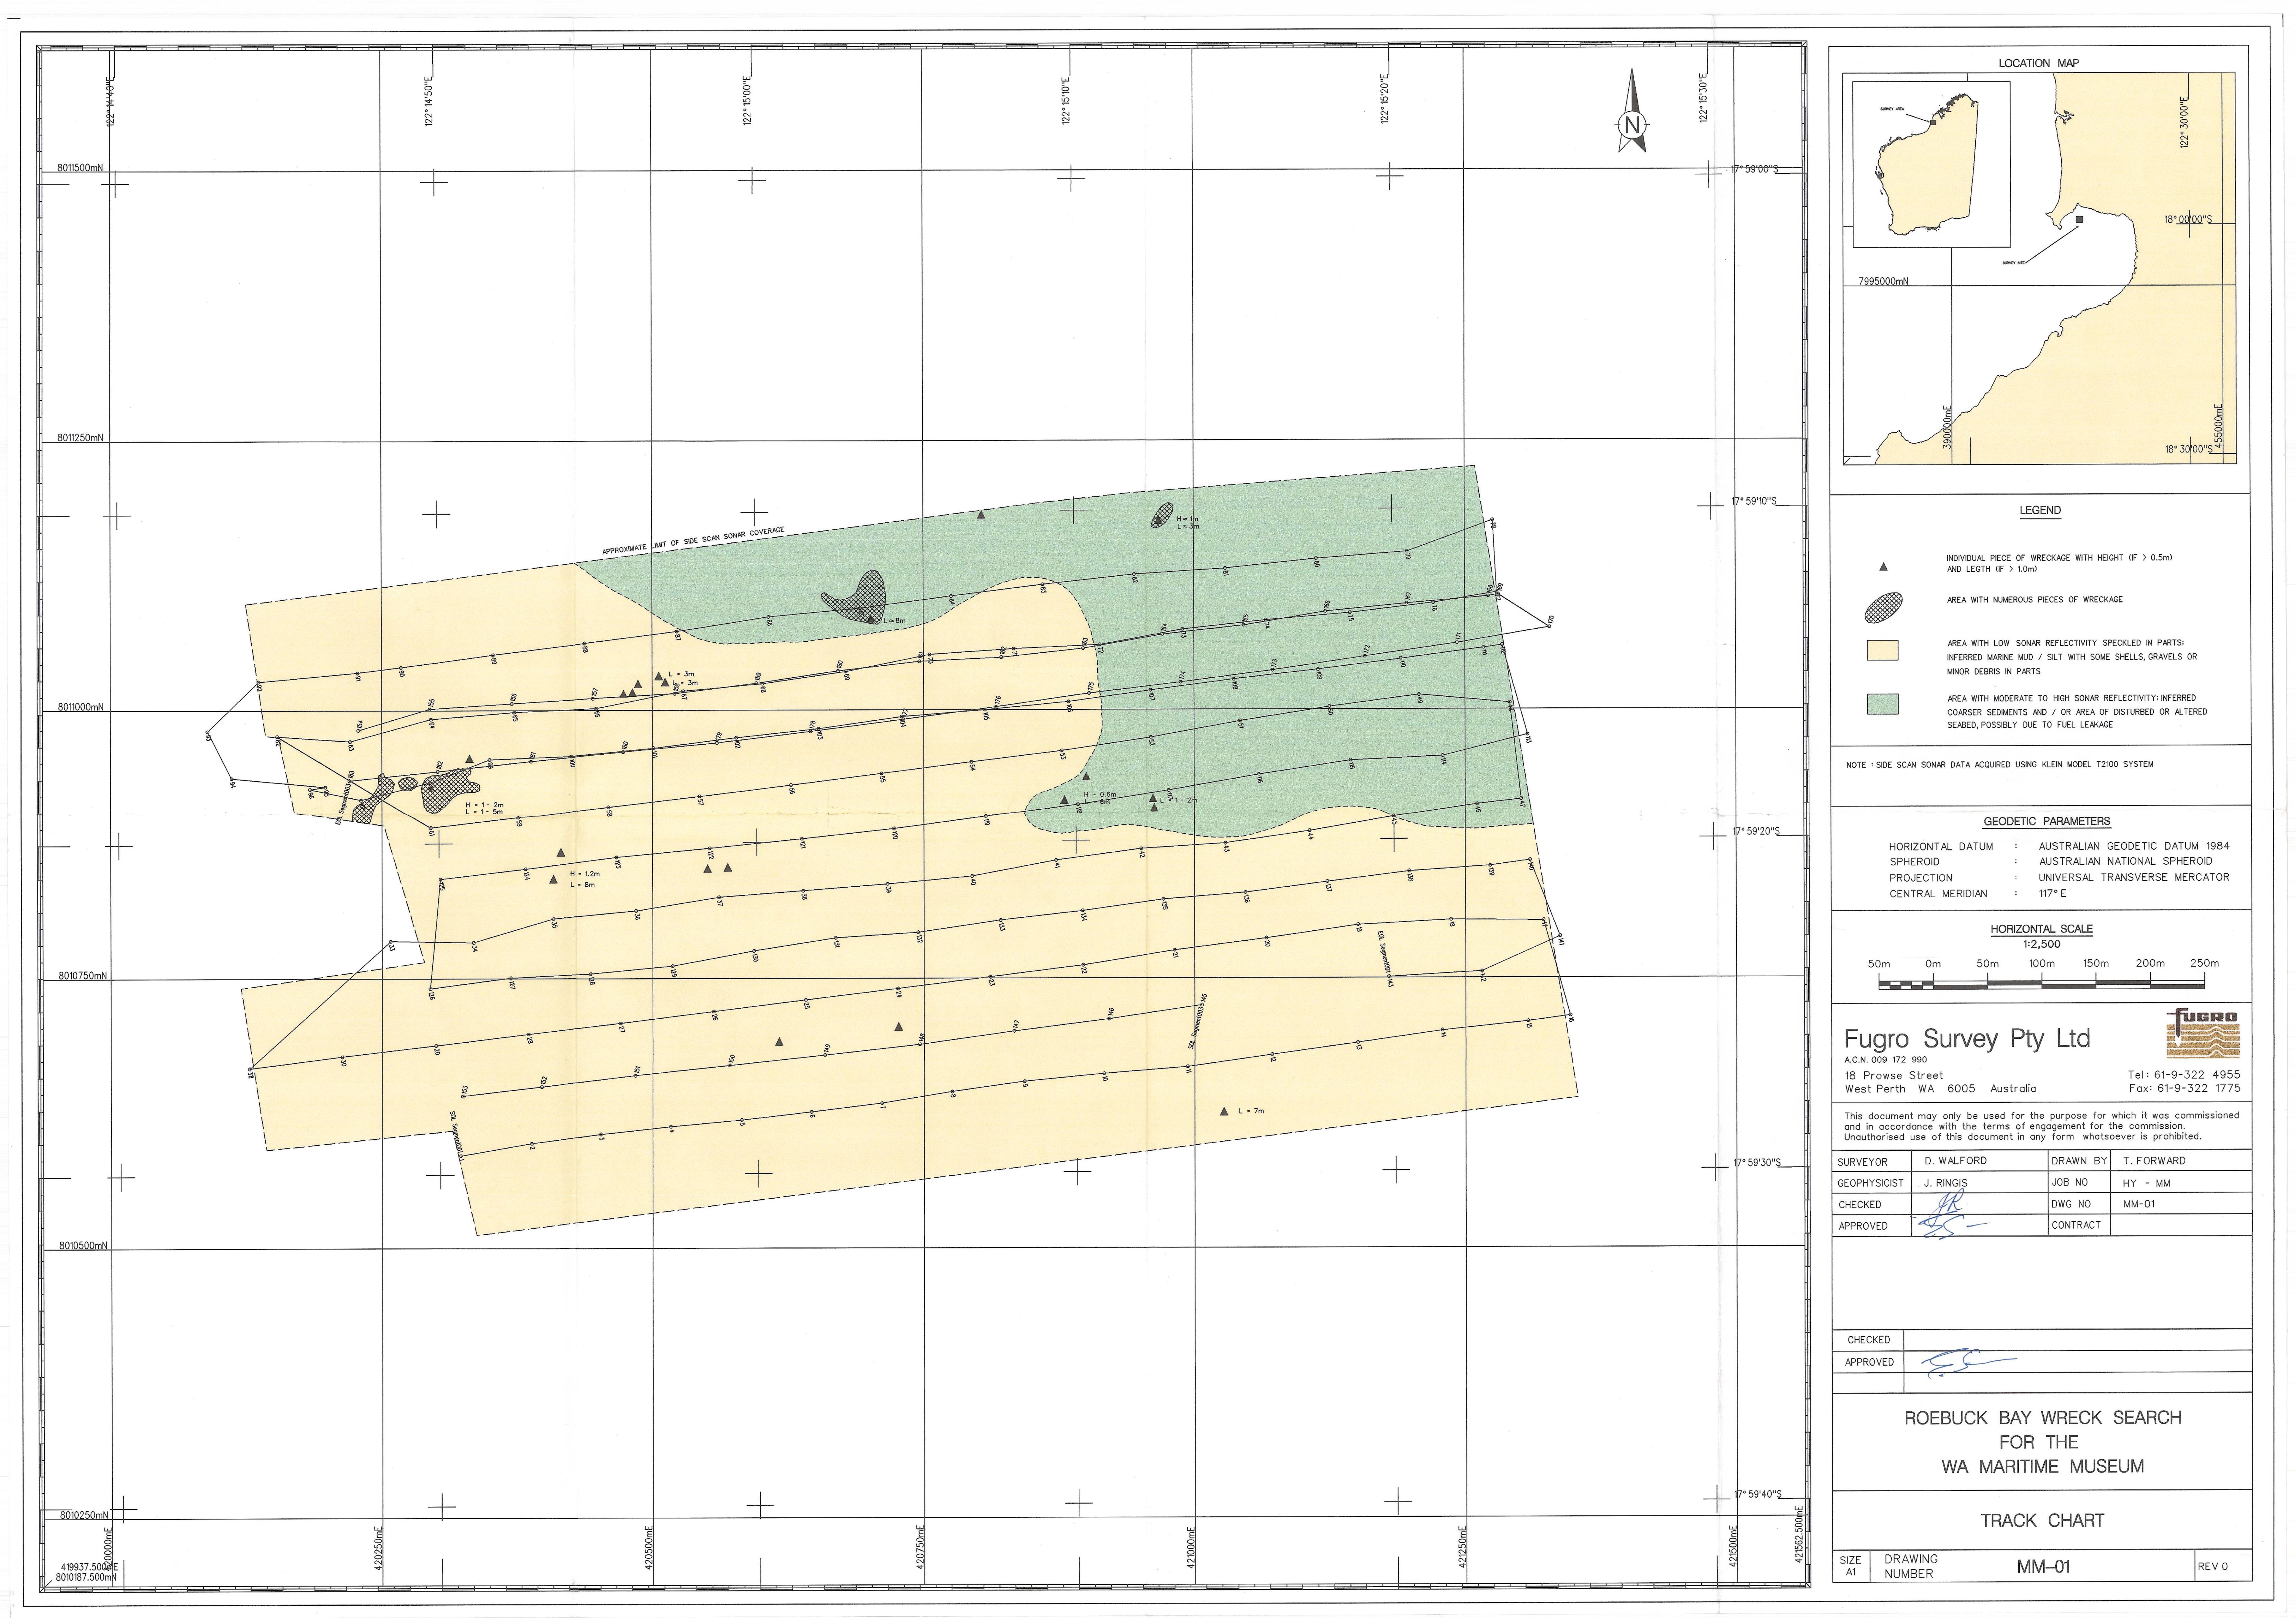 Area covered by survey and horizontal lines show the movement of the vessel.